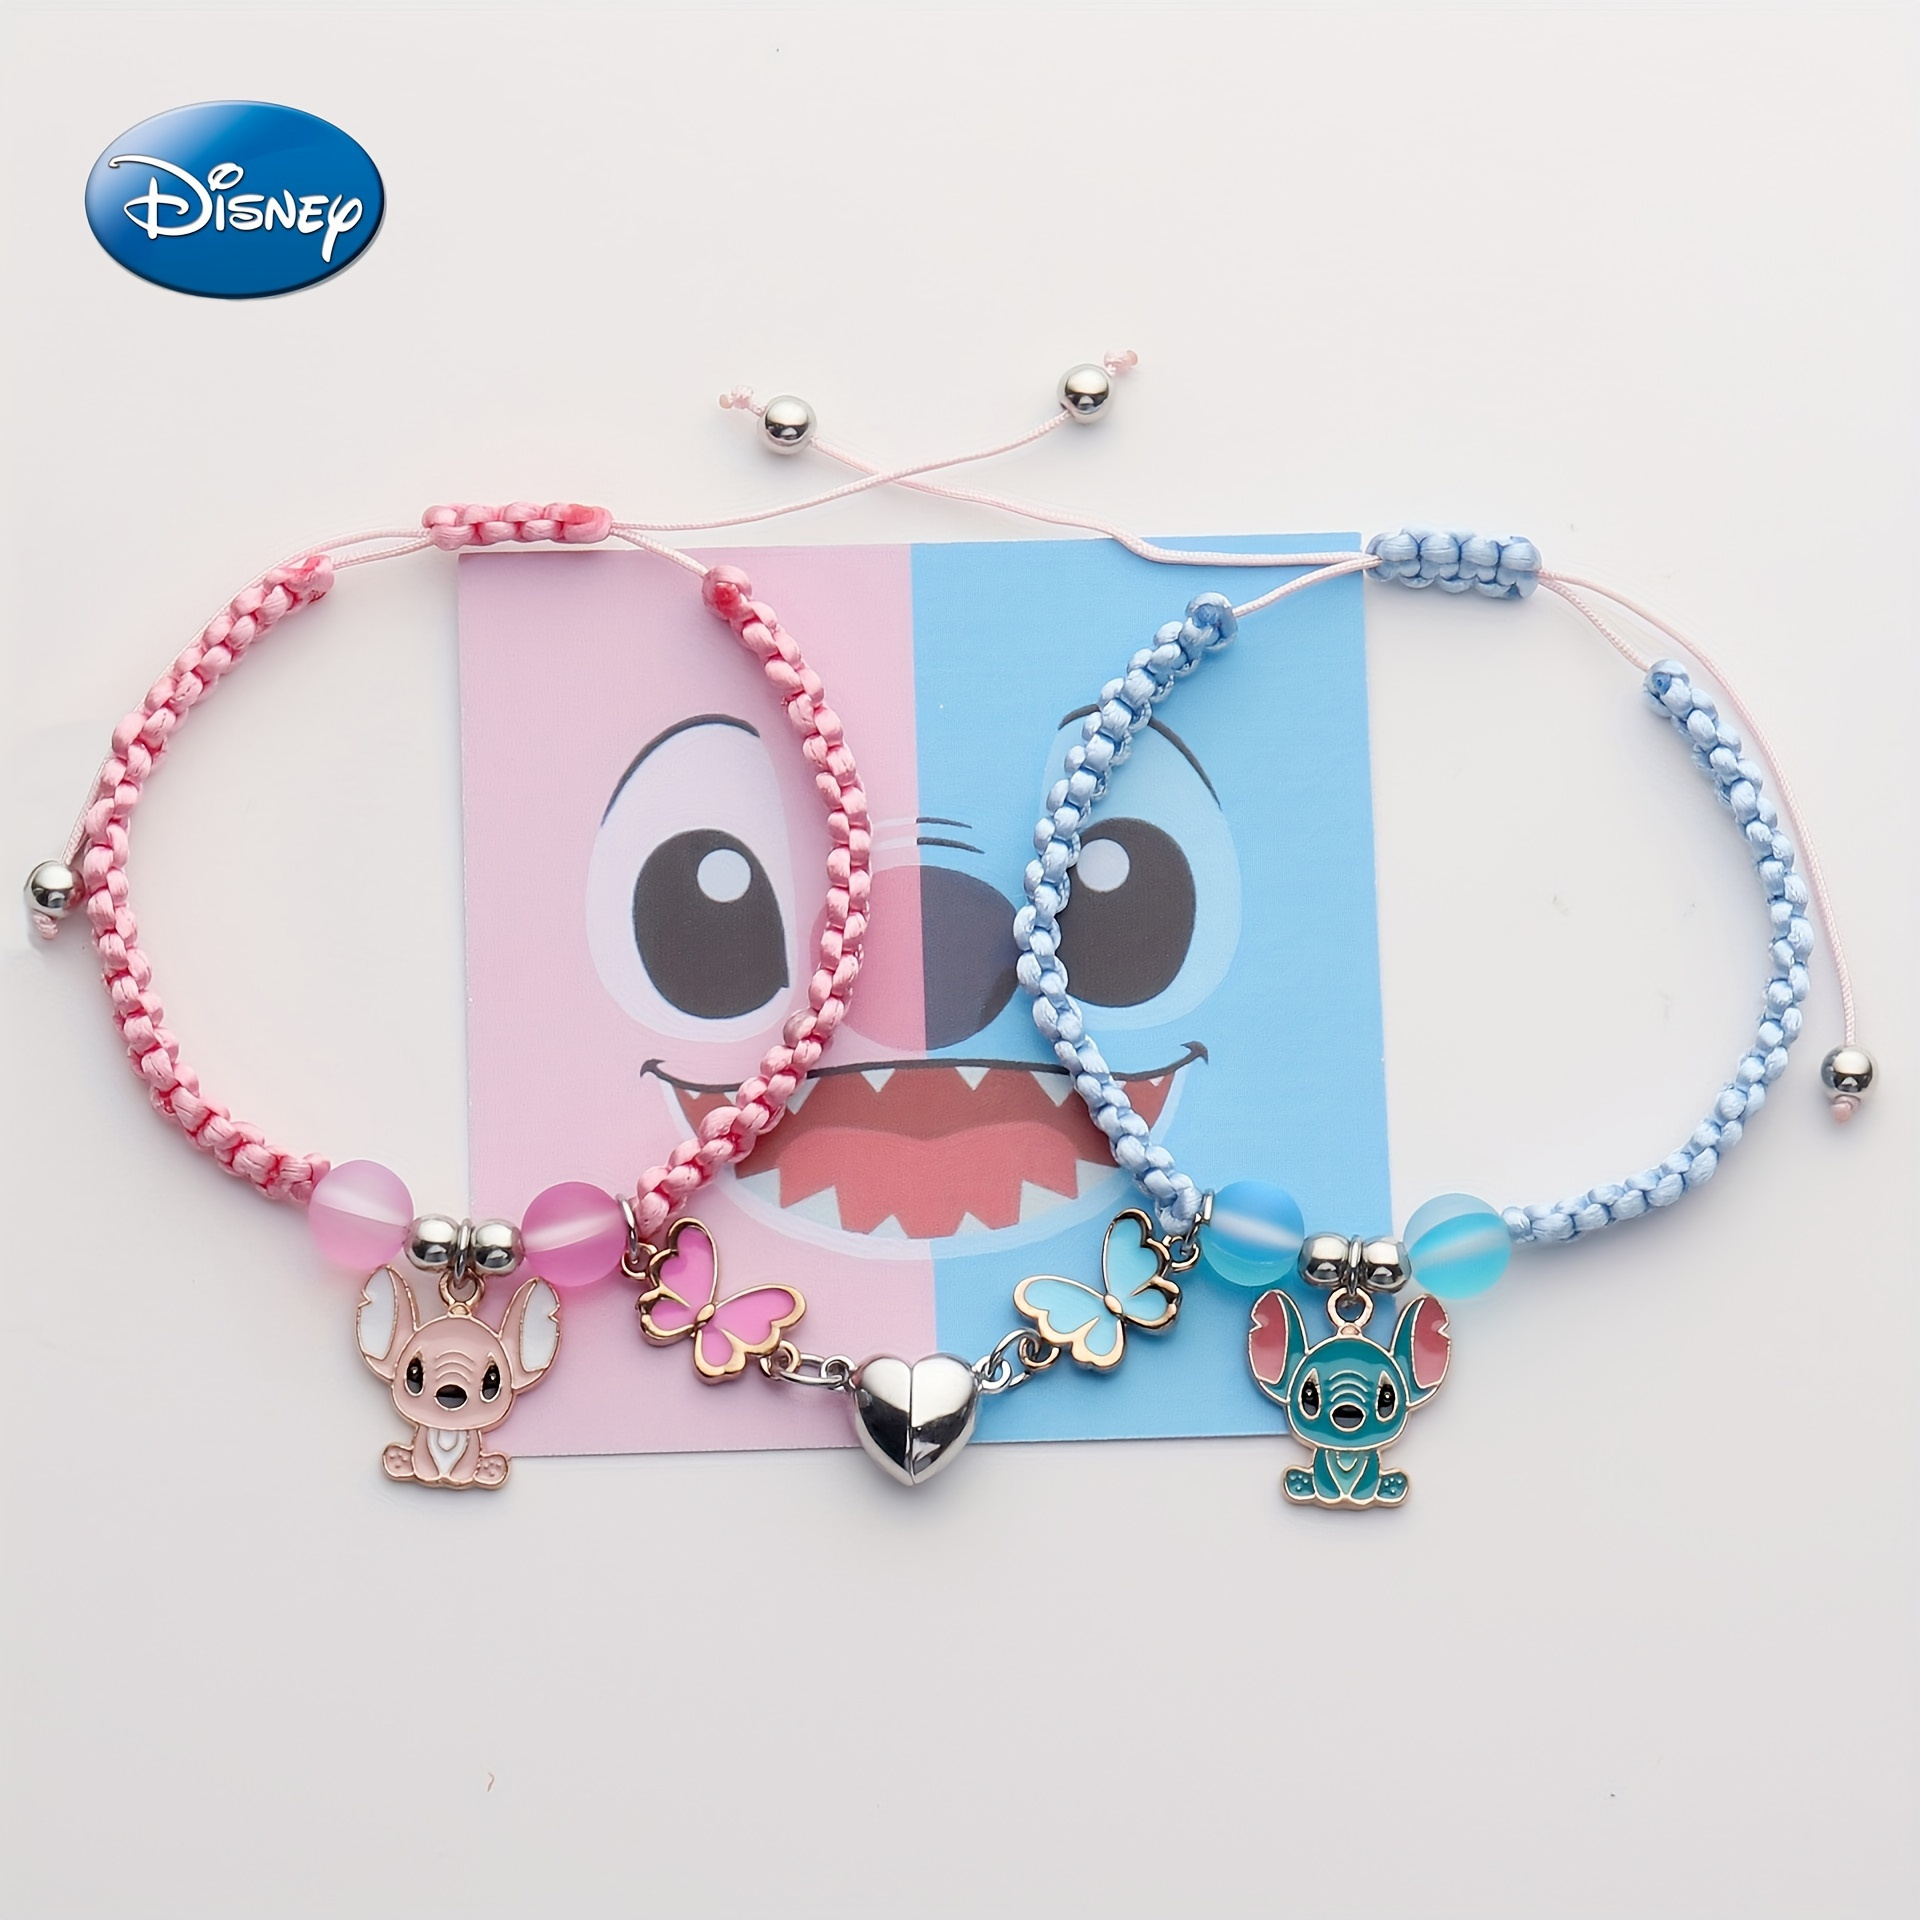 

Disney Charm Bracelets, Couple's Braided Bracelets With Cartoon Charms, Cute Love-themed Jewelry, Perfect Birthday Gift For Couples